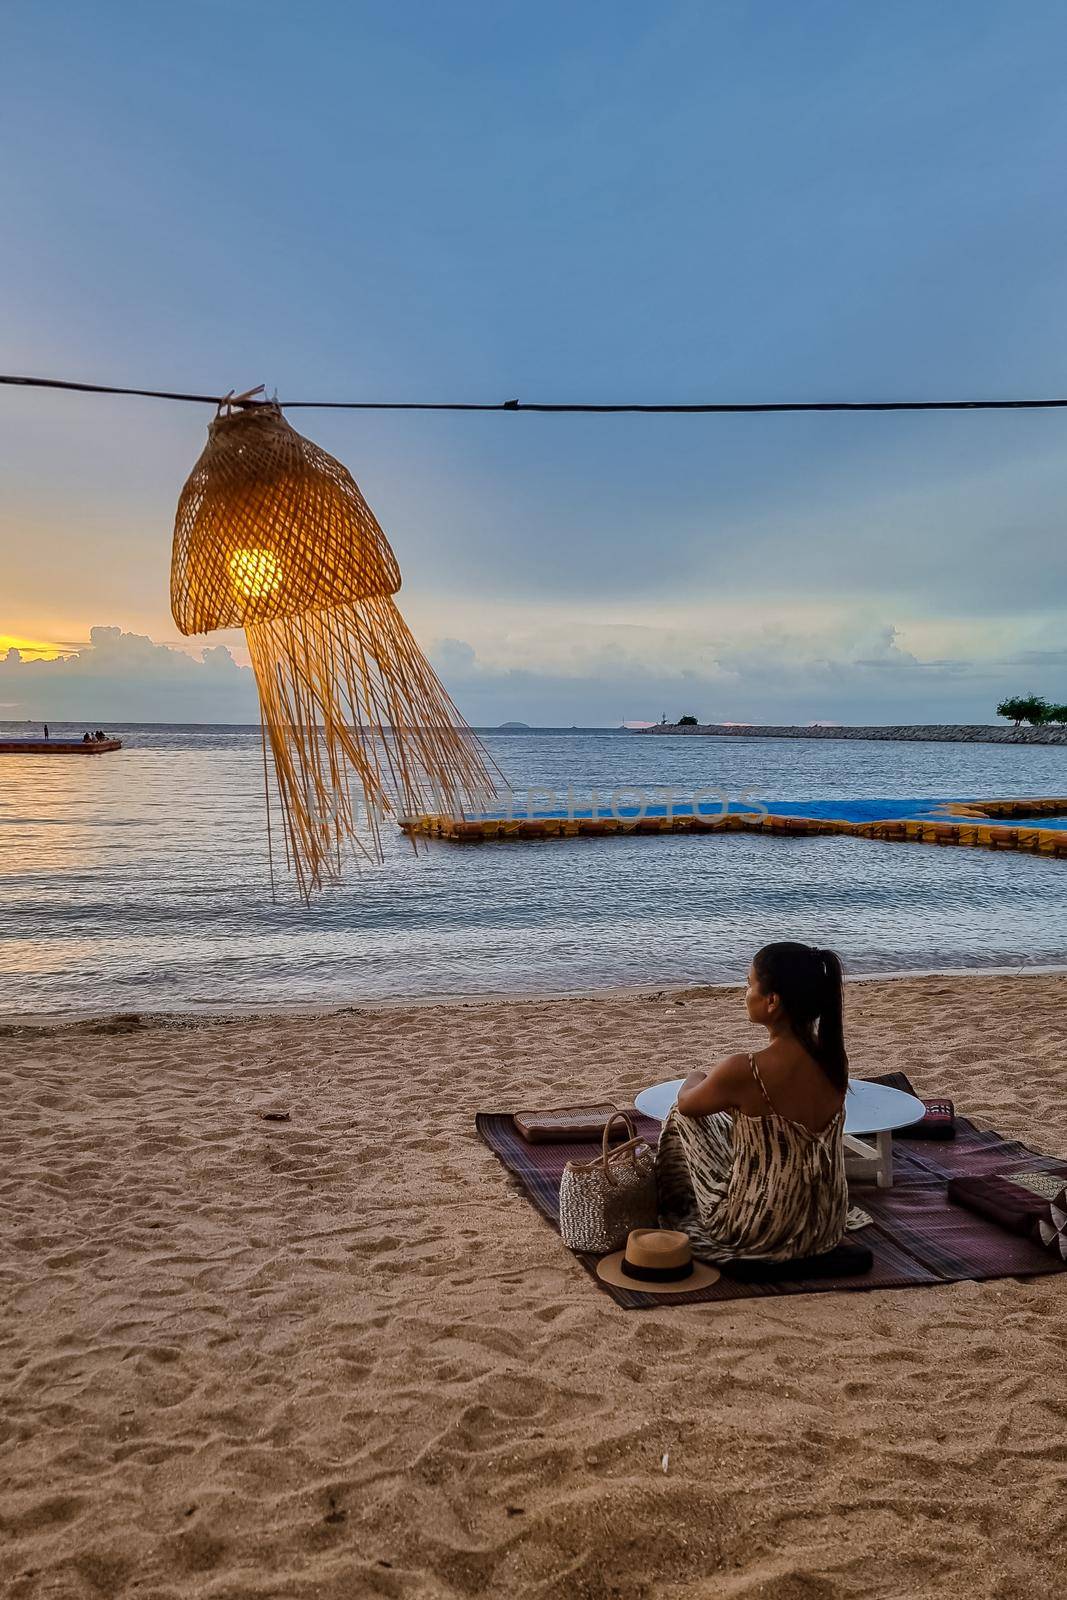 women bbq cooking noodle soup on the beach in Pattaya during sunset in Thailand Ban Amphur beach by fokkebok